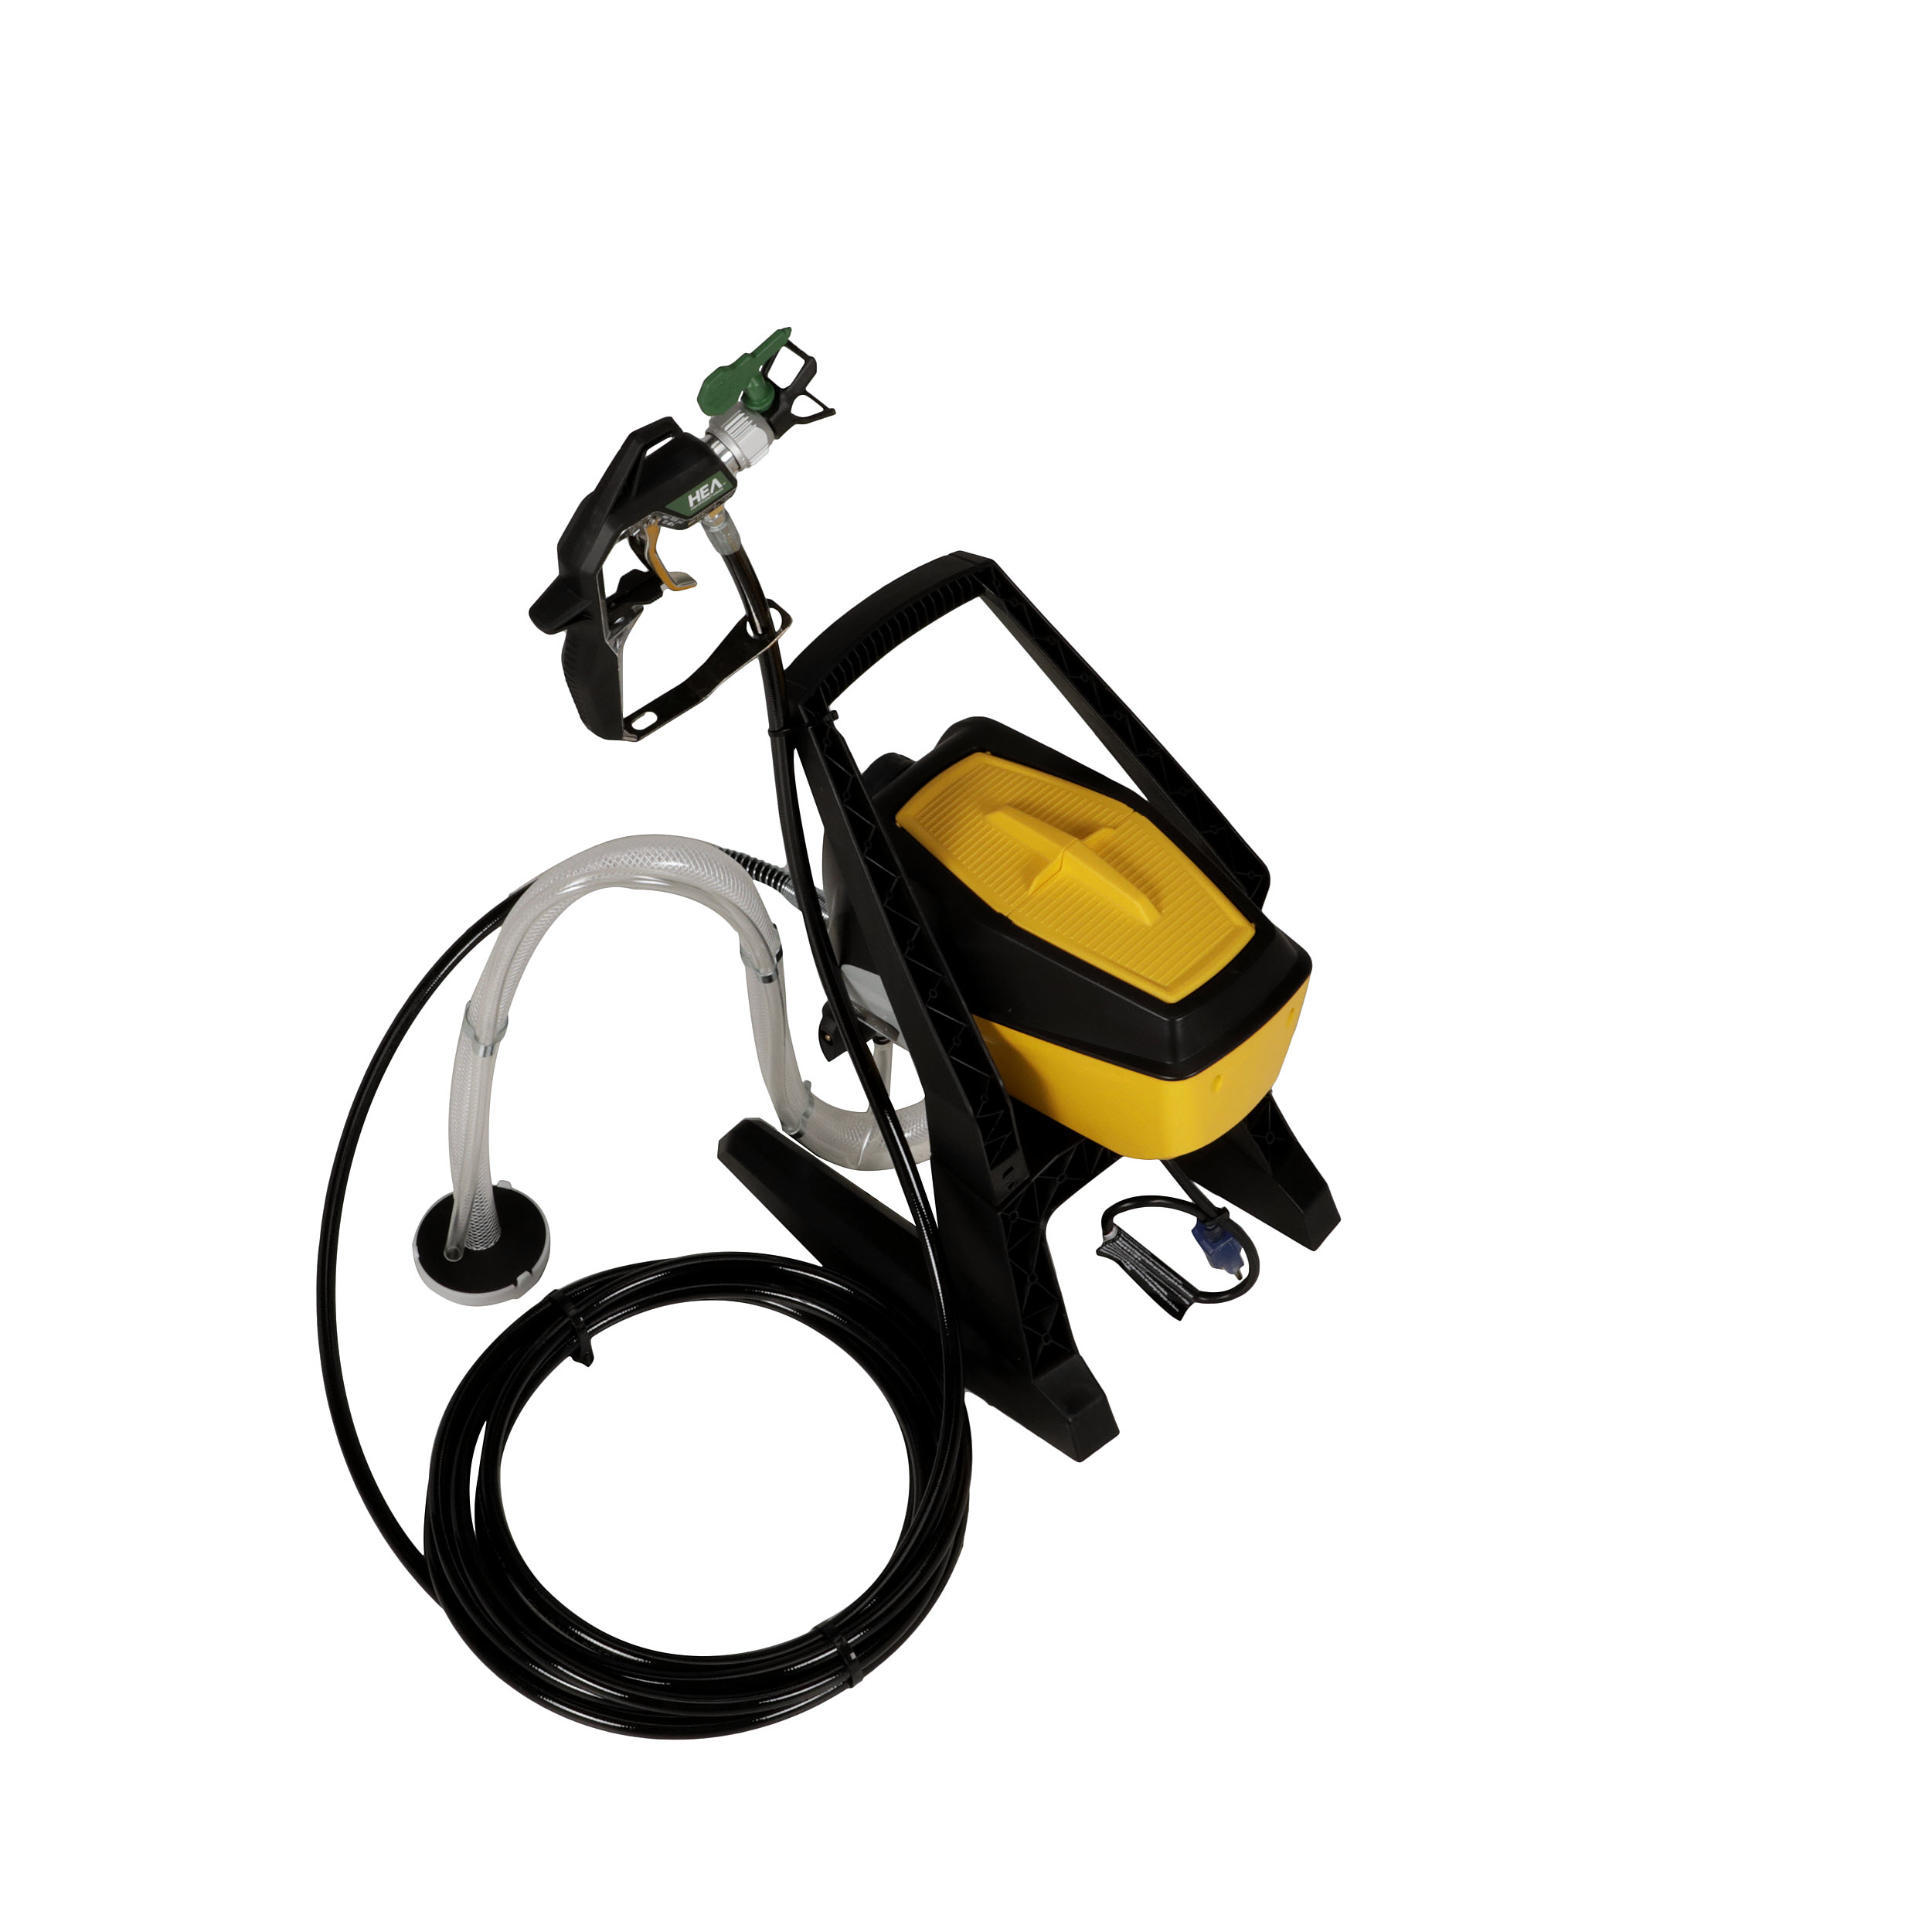 Wagner 0580000 Control Pro 150 Paint Sprayer, High Efficiency Airless  Sprayer with Low Overspray